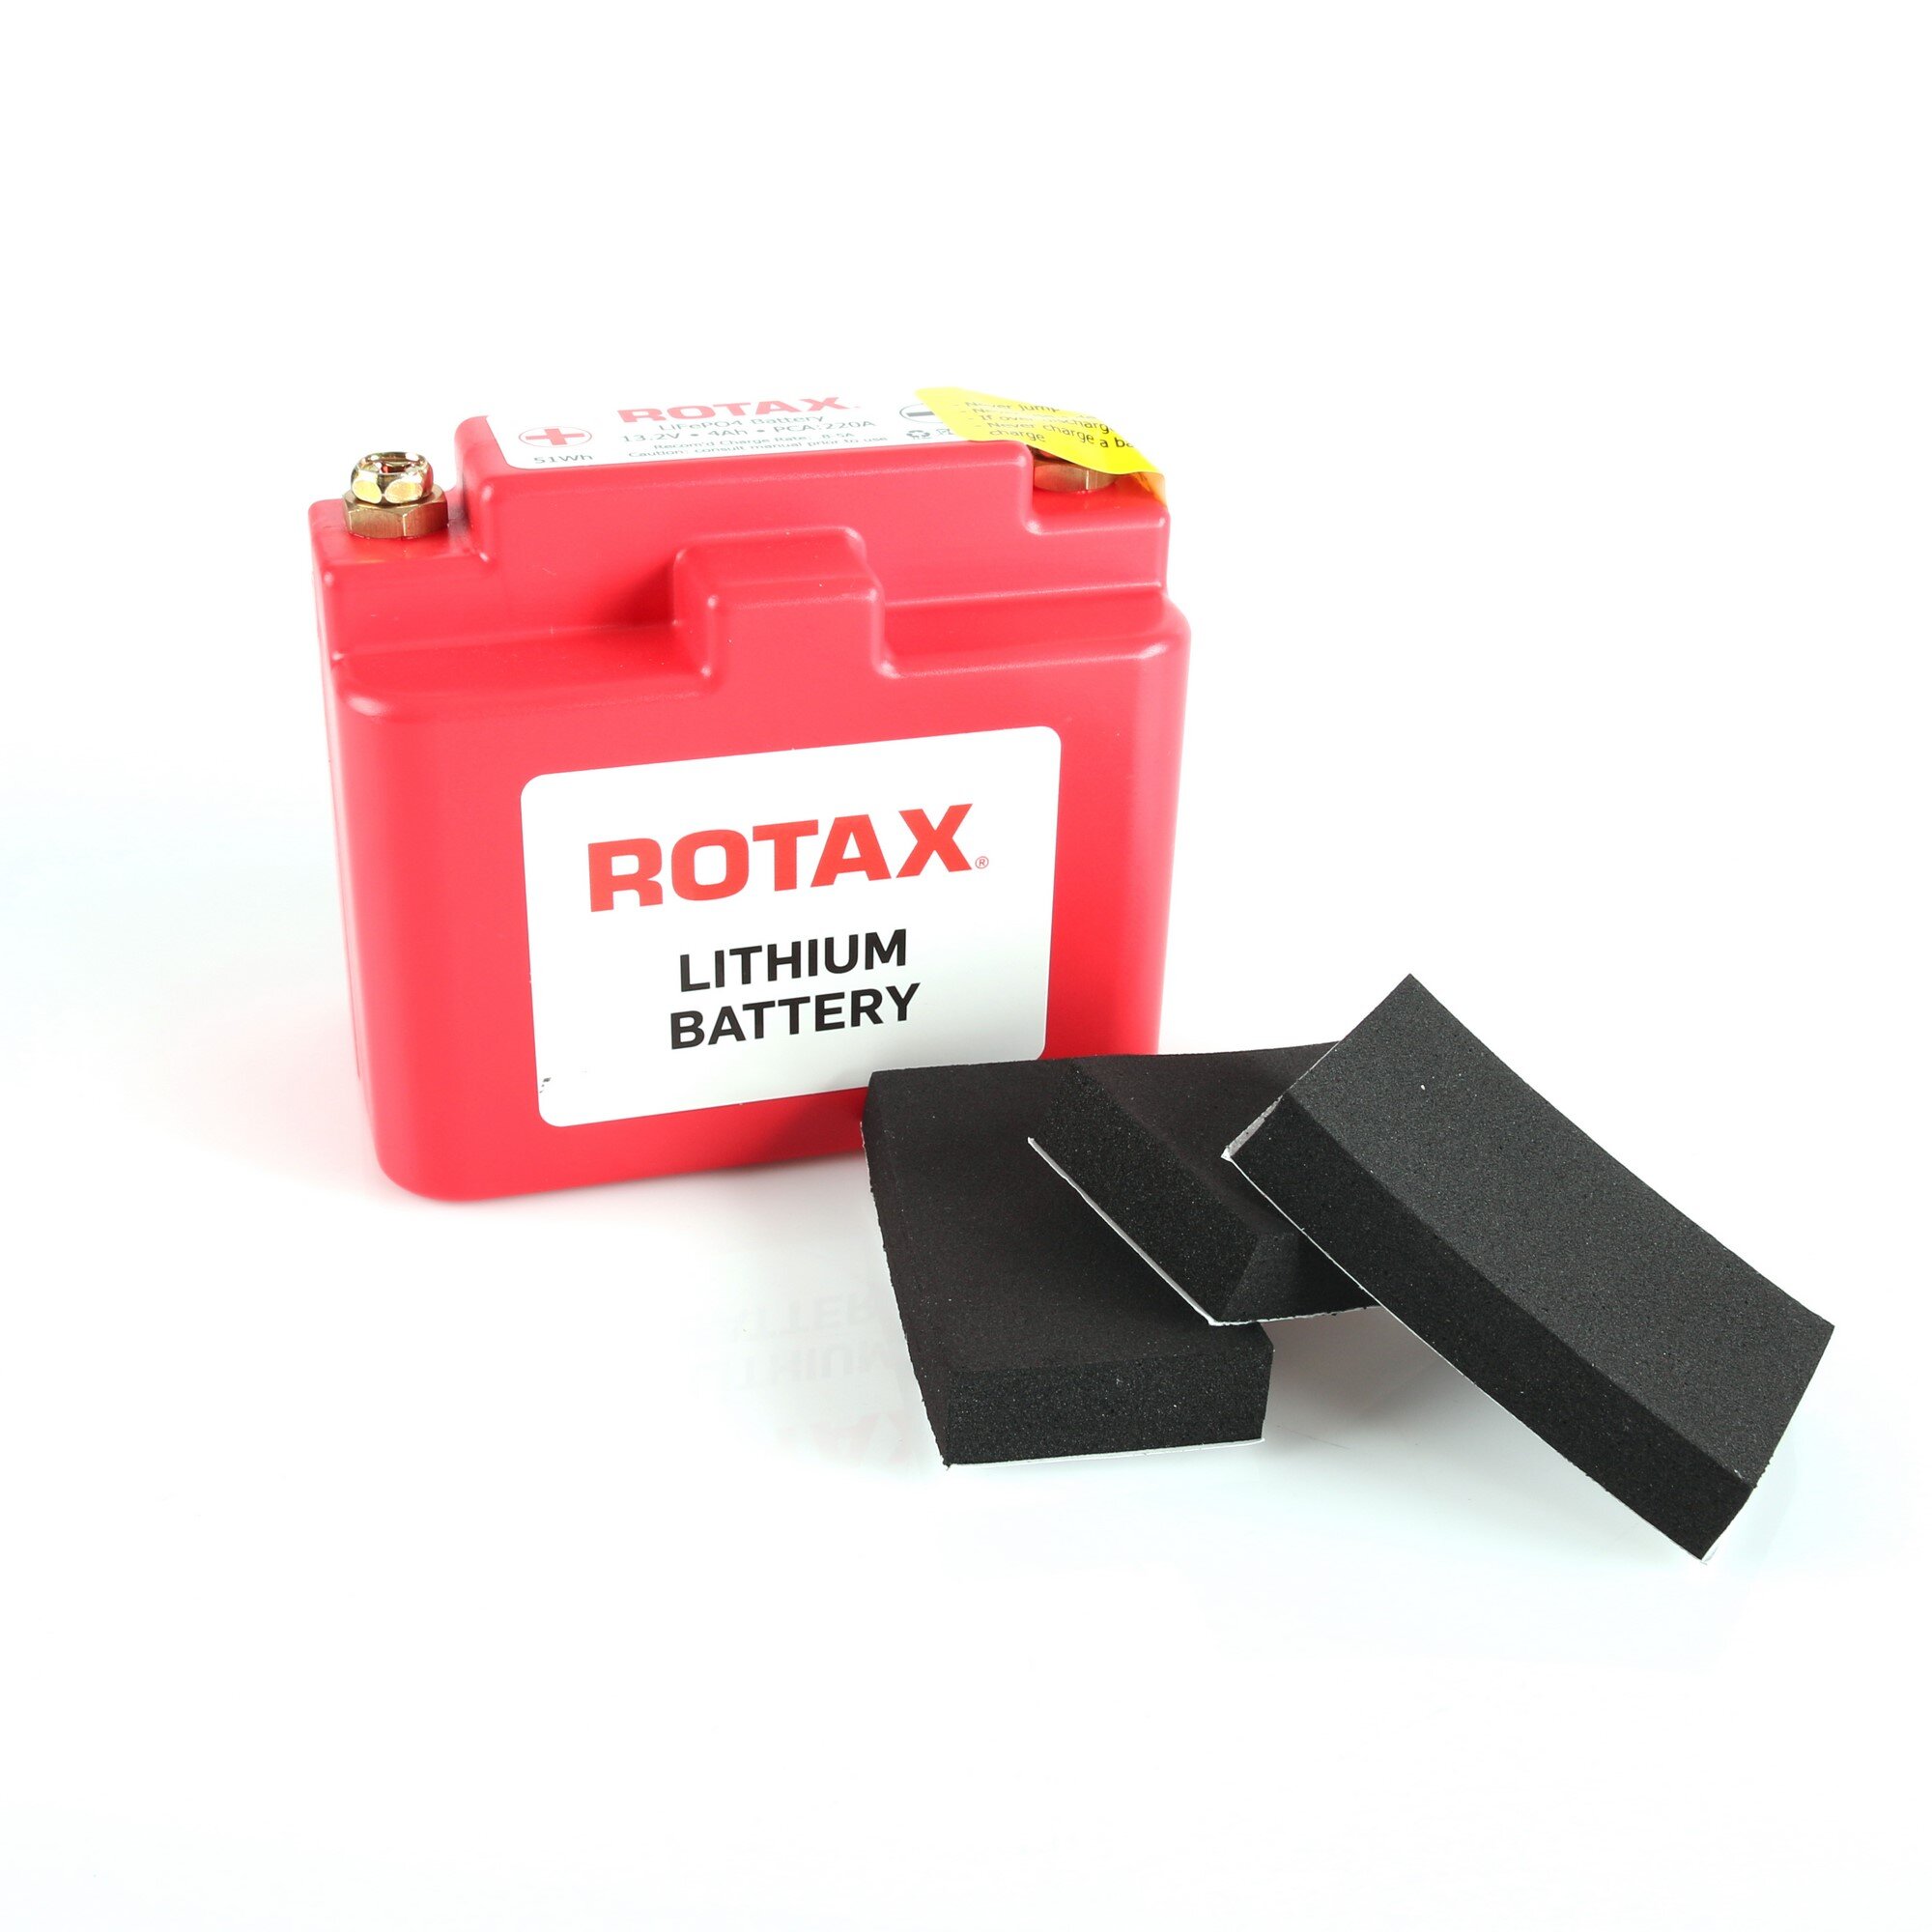 Lightweight Lithium (LiFePo4) battery for Rotax Max